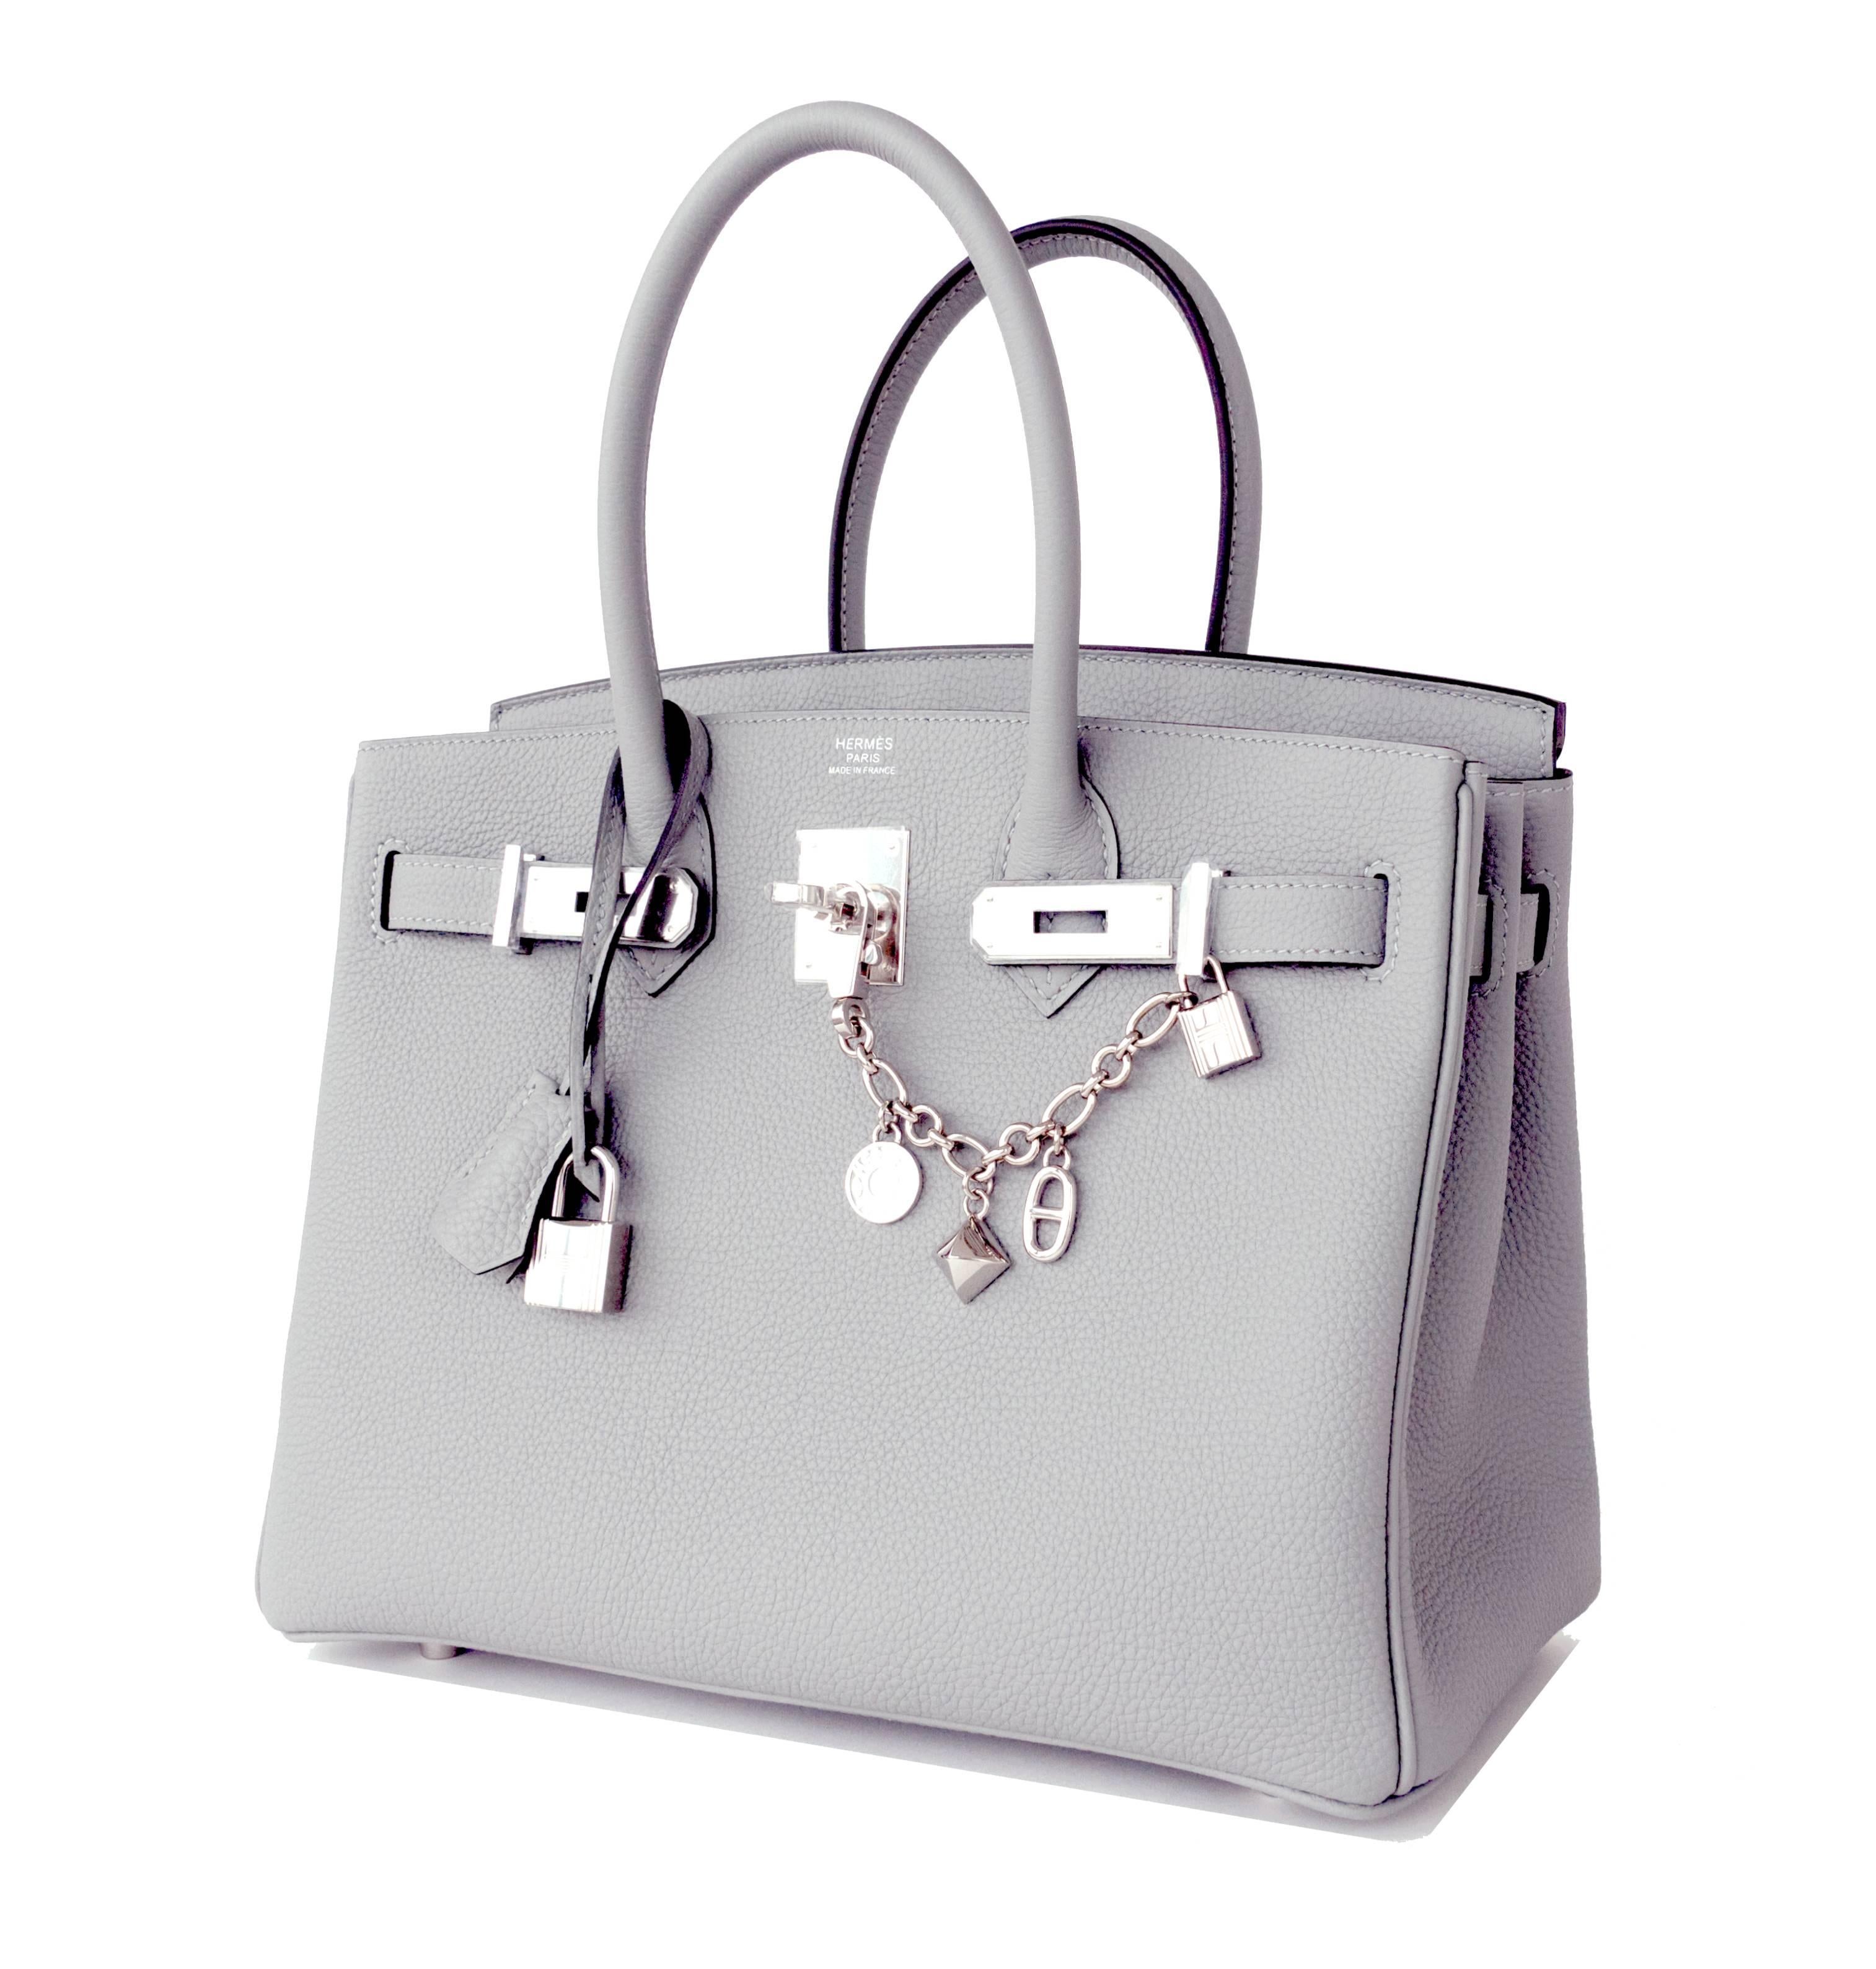 Hermes Gris Mouette New Grey 30cm Togo Birkin Bag Palladium So Chic
Store fresh. Pristine condition (with plastic on hardware). 
Just purchased from Hermes store in 2016 with new interior X Stamp. 
Perfect gift! Comes with keys, lock, clochette,